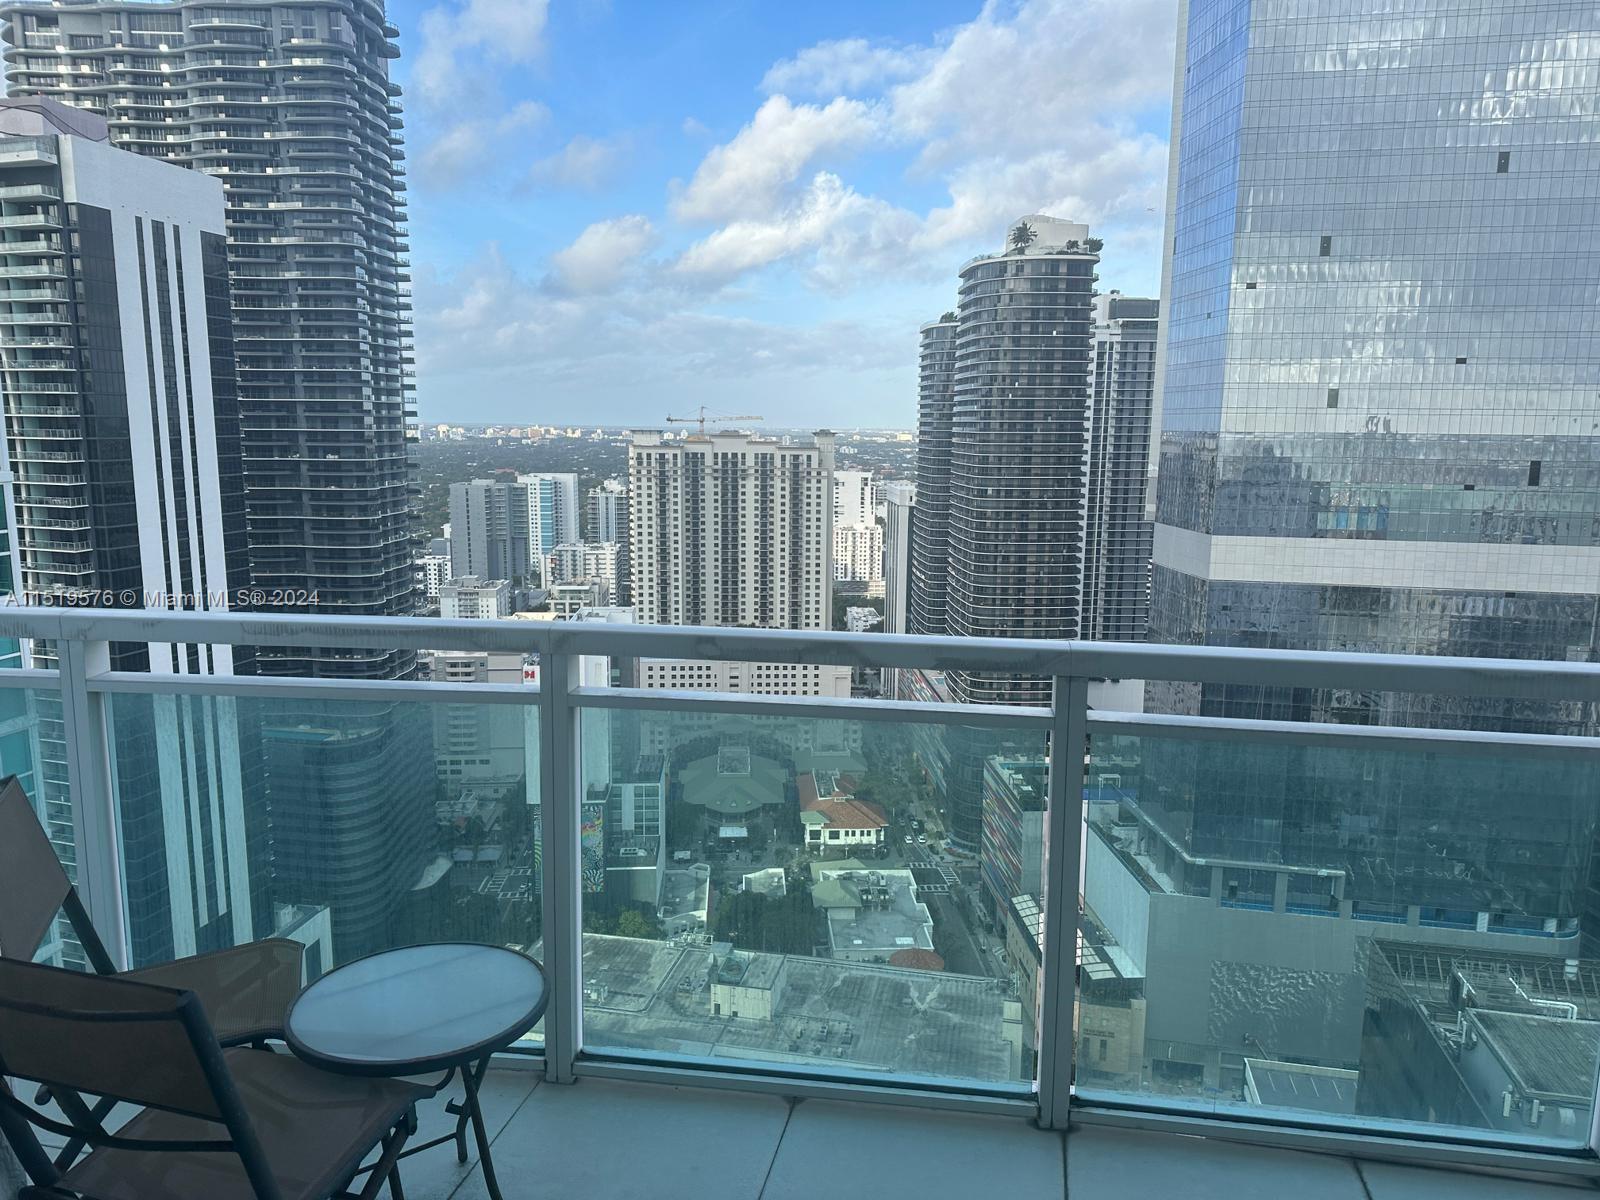 1BD/1BA at The Plaza, one of the best buildings in Brickell within walking distance to Brickell City Center, Mary Brickell Village and more! Updated ceramic white floors and great city views in this corner unit. Amenities include pool, gym, business center, kids play area, and party room. 

Pictures are from previous tenant. 

Available March 1st. Easy to show, please allow 24hr notice as tenant in place. Text or call Listing Agent.